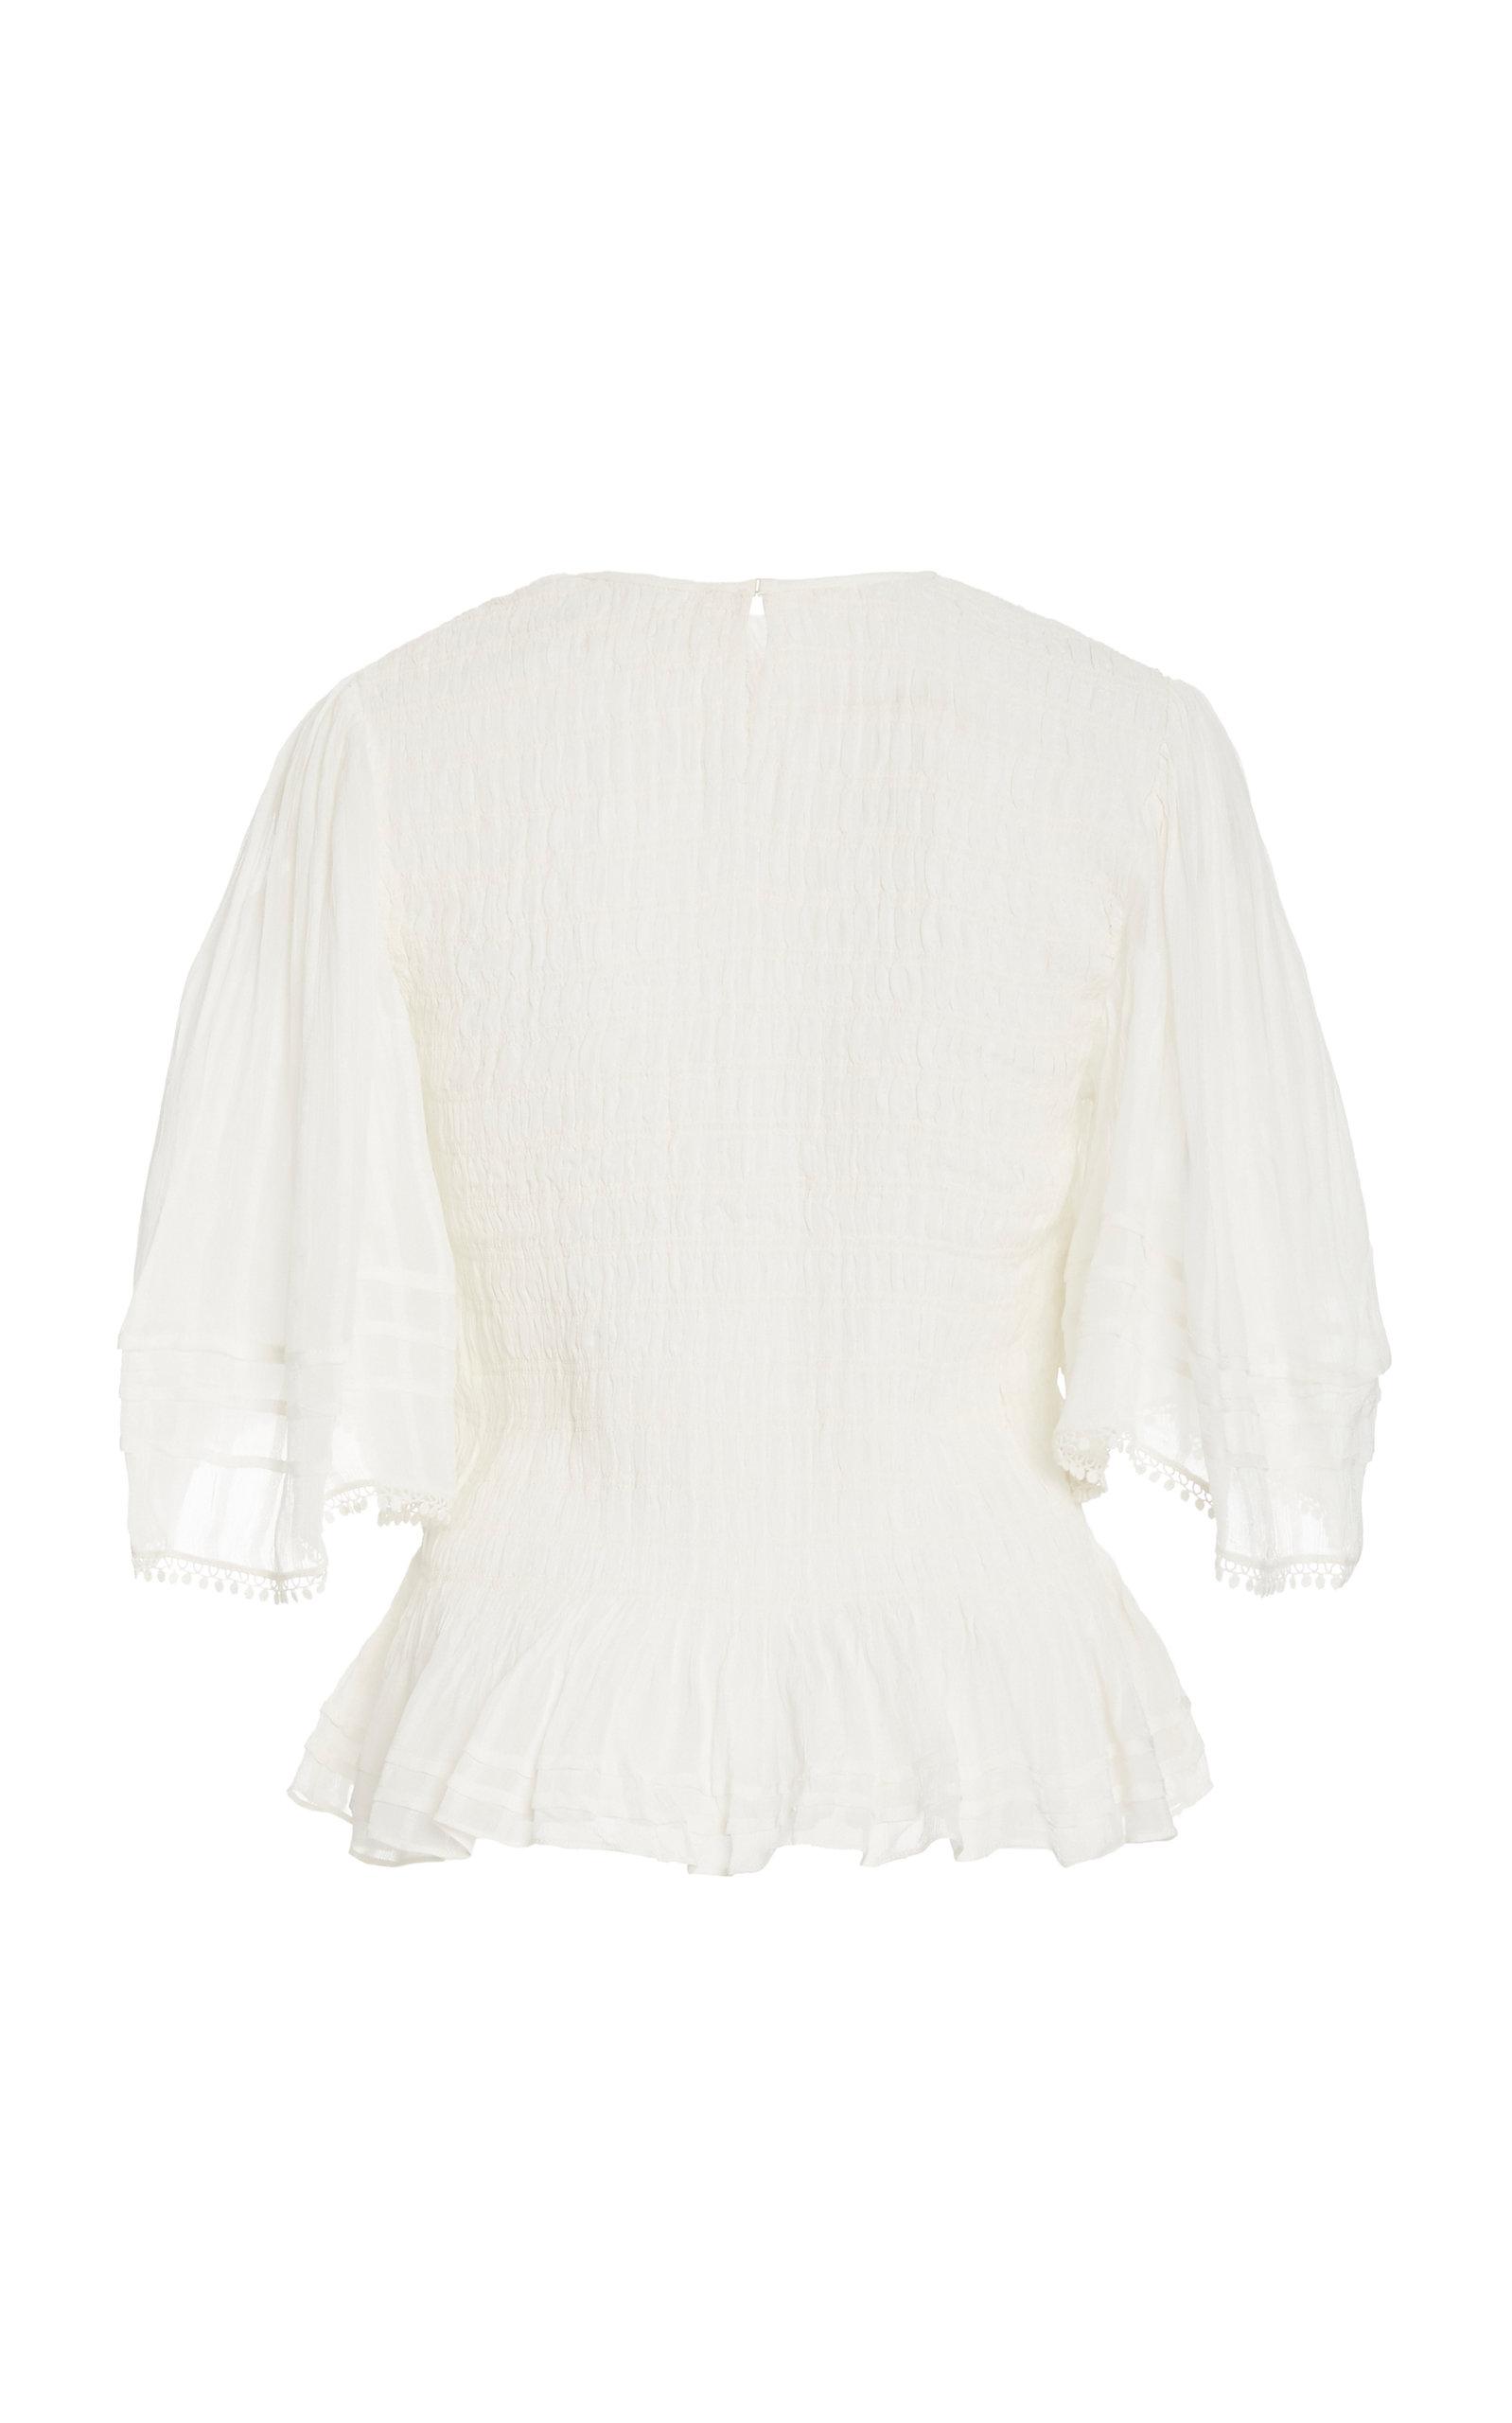 Étoile Isabel Marant Janette Smocked Lace Top in White - Lyst